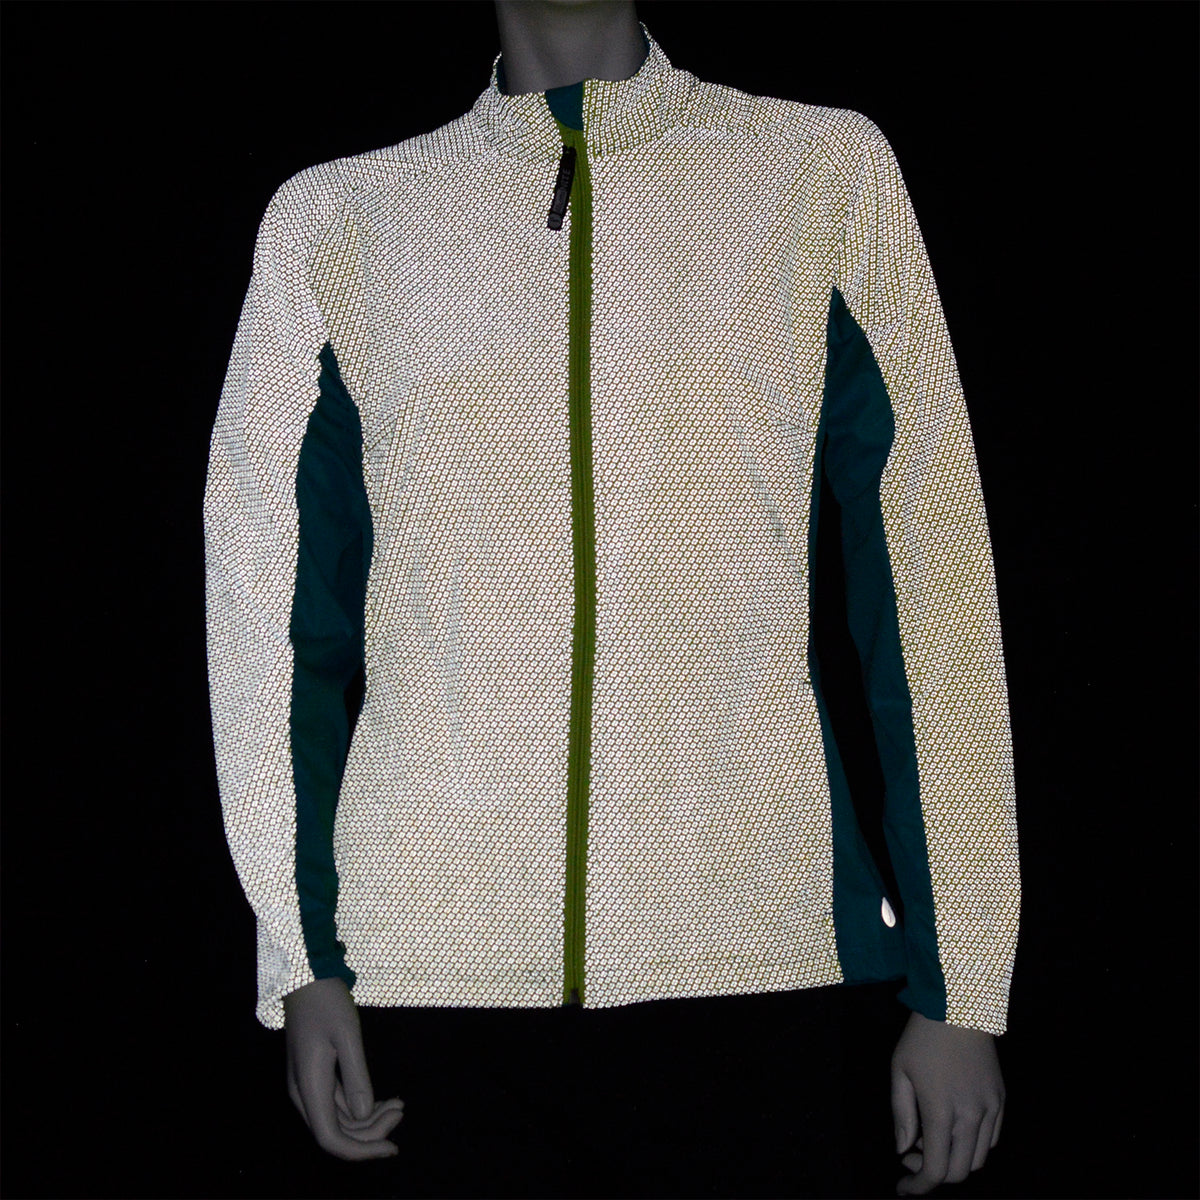 Dover Women's Softshell Reflective Running Jacket in Flo Lime/Peacock